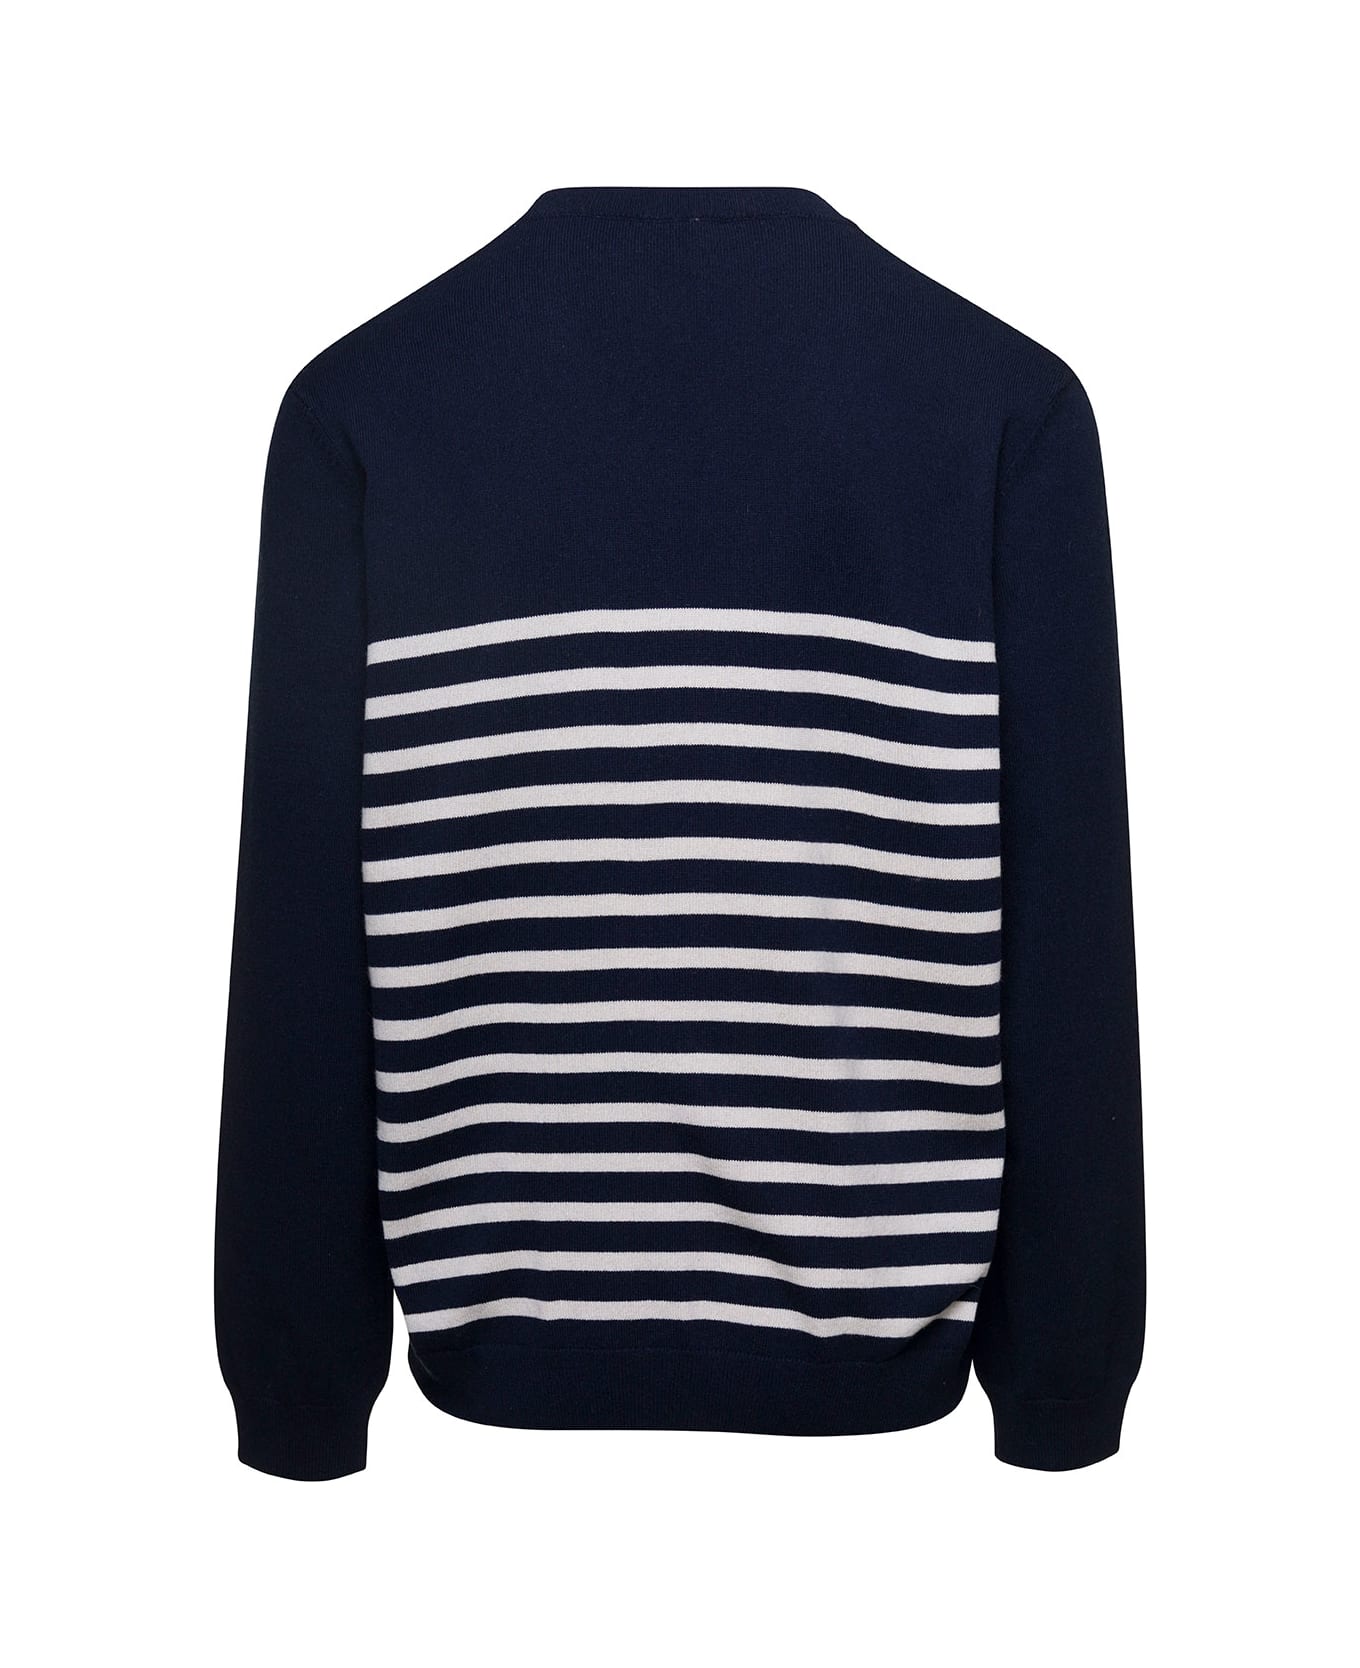 A.P.C. 'matthew' Blue And White Crewneck Sweater With Striped Motif In Cotton And Cashmere Man - Blu